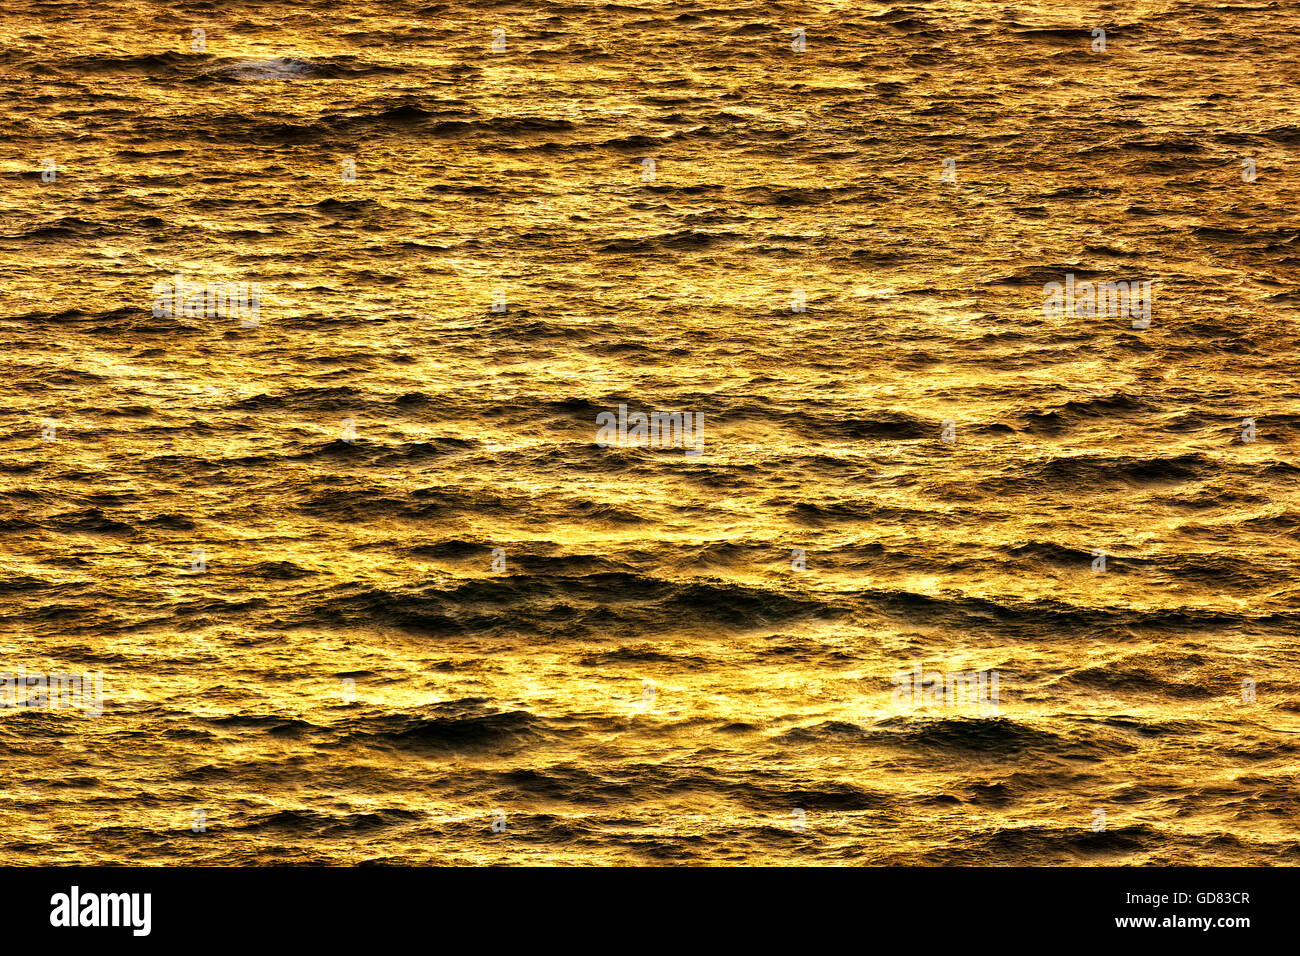 sea water texture at the sunset Stock Photo